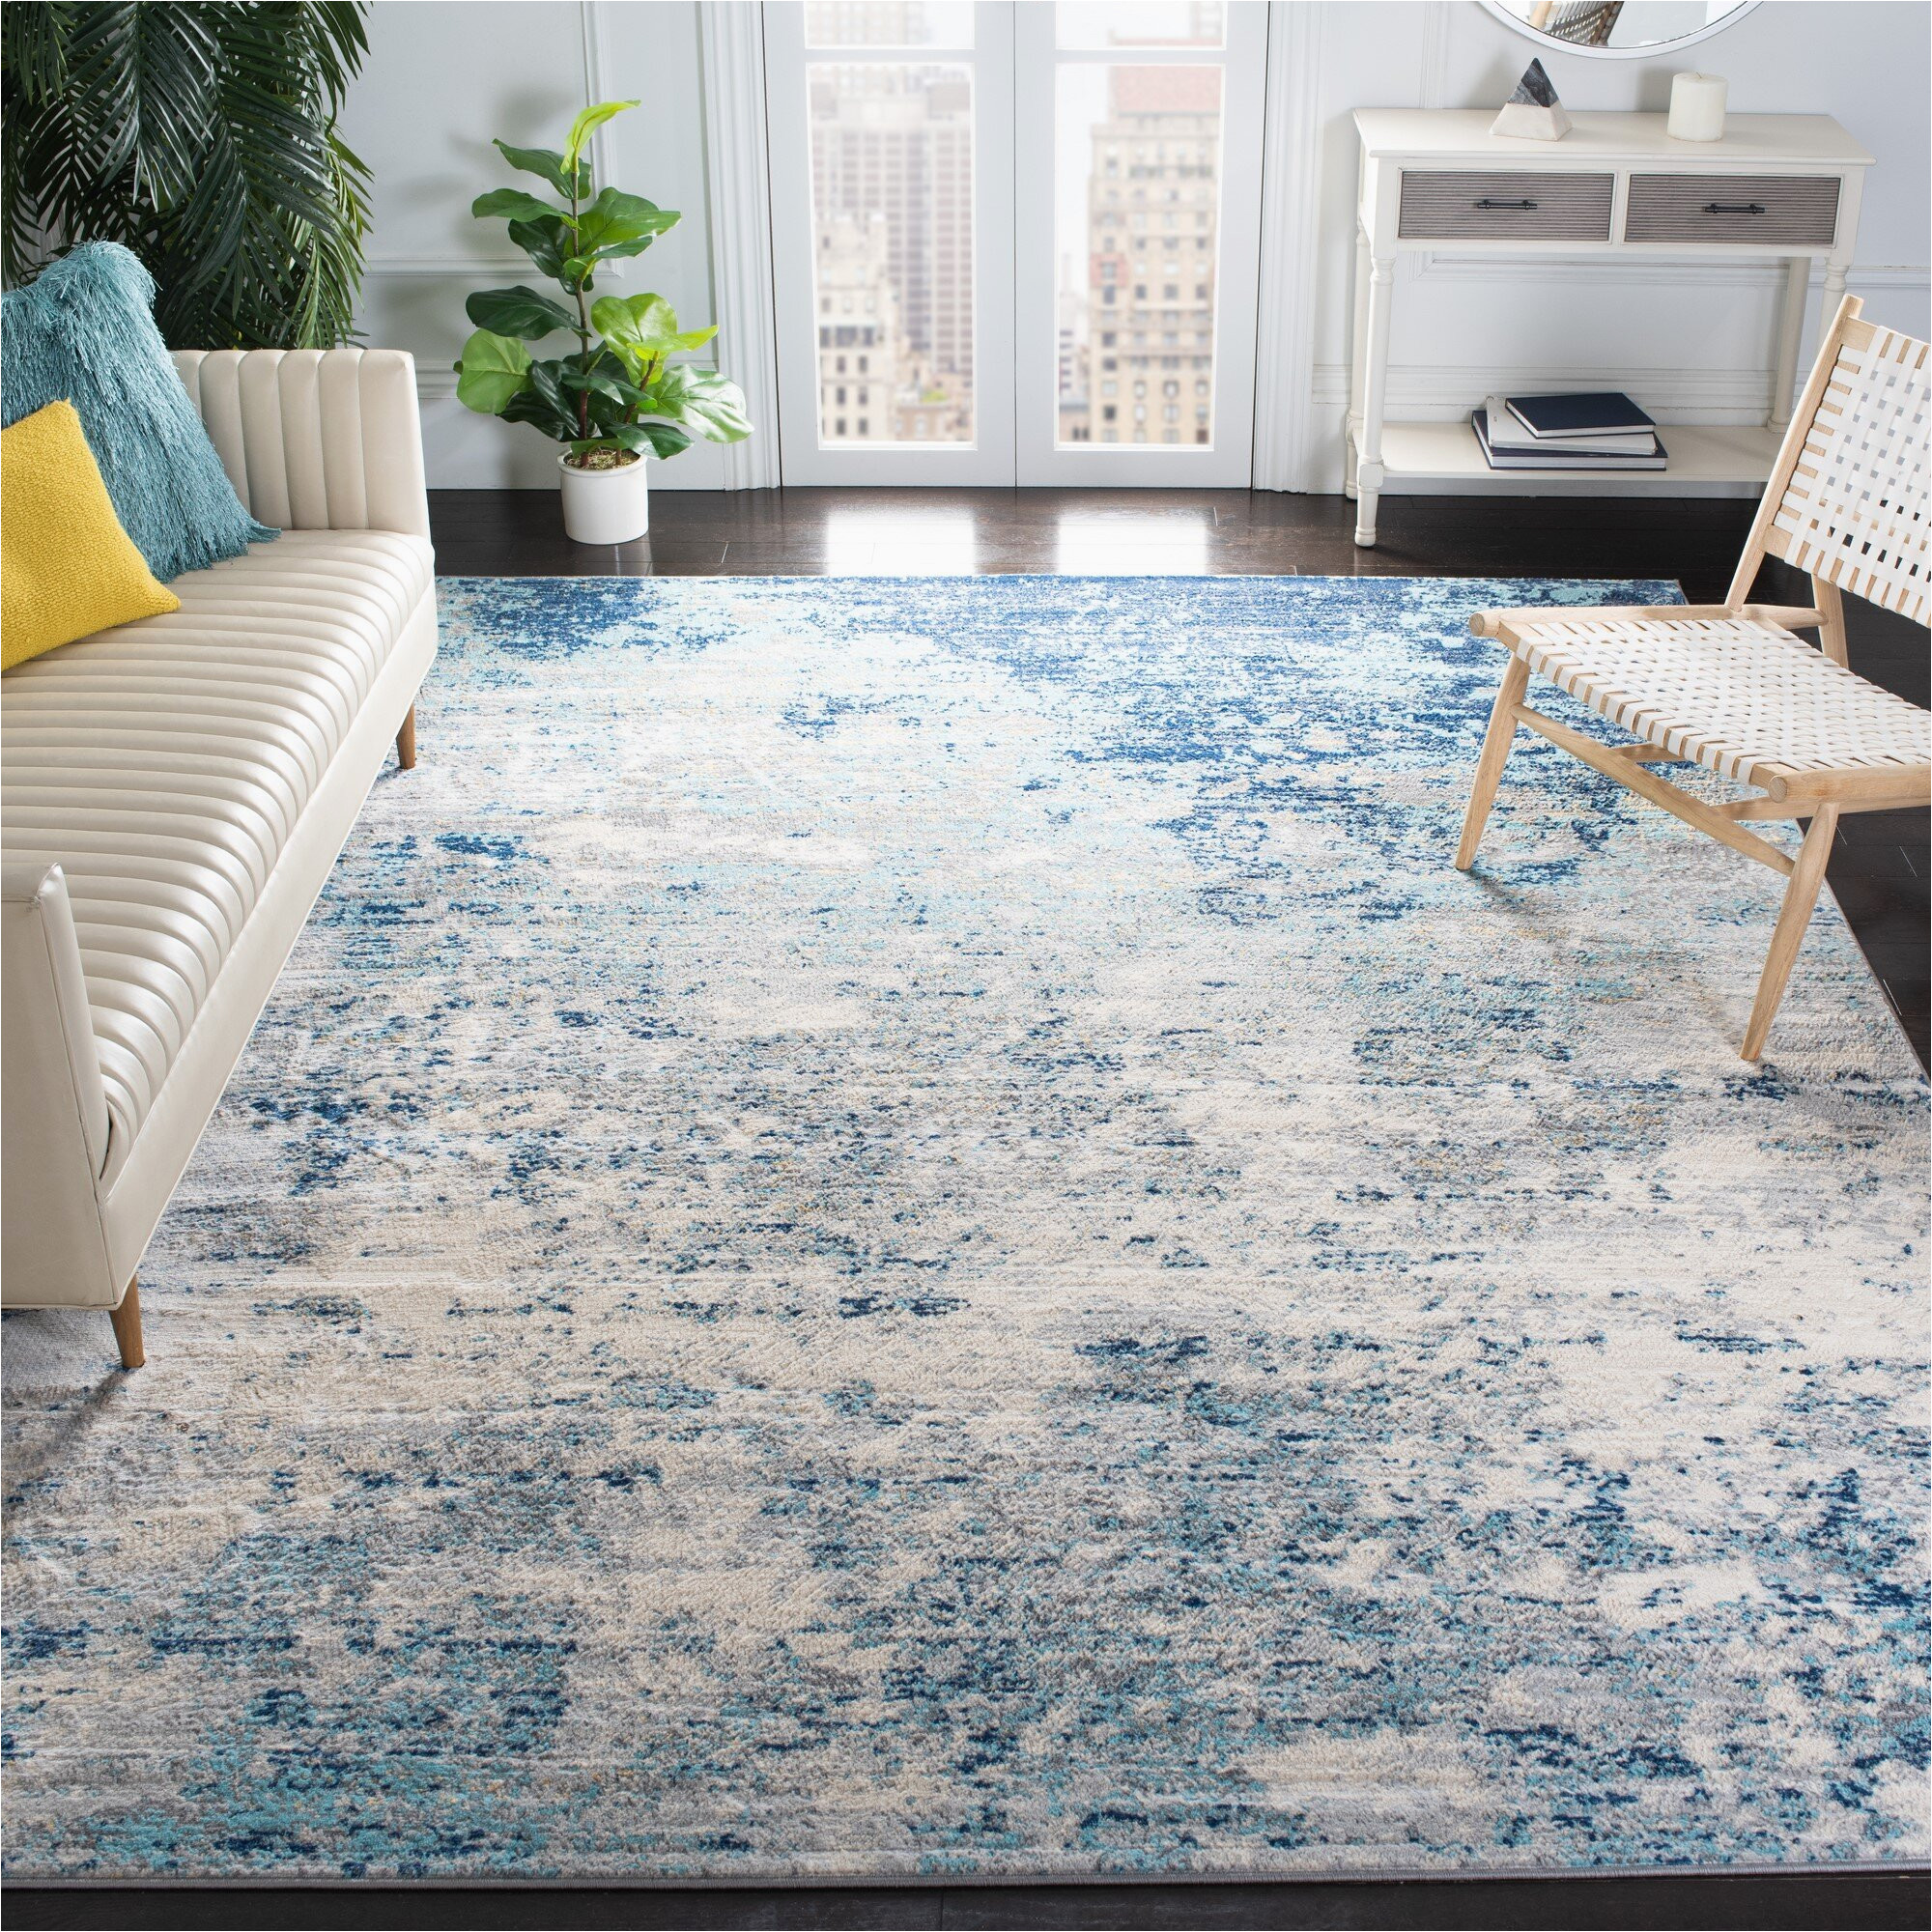 Light Blue and Gray area Rug N’keal Abstract Light Gray/blue area Rug